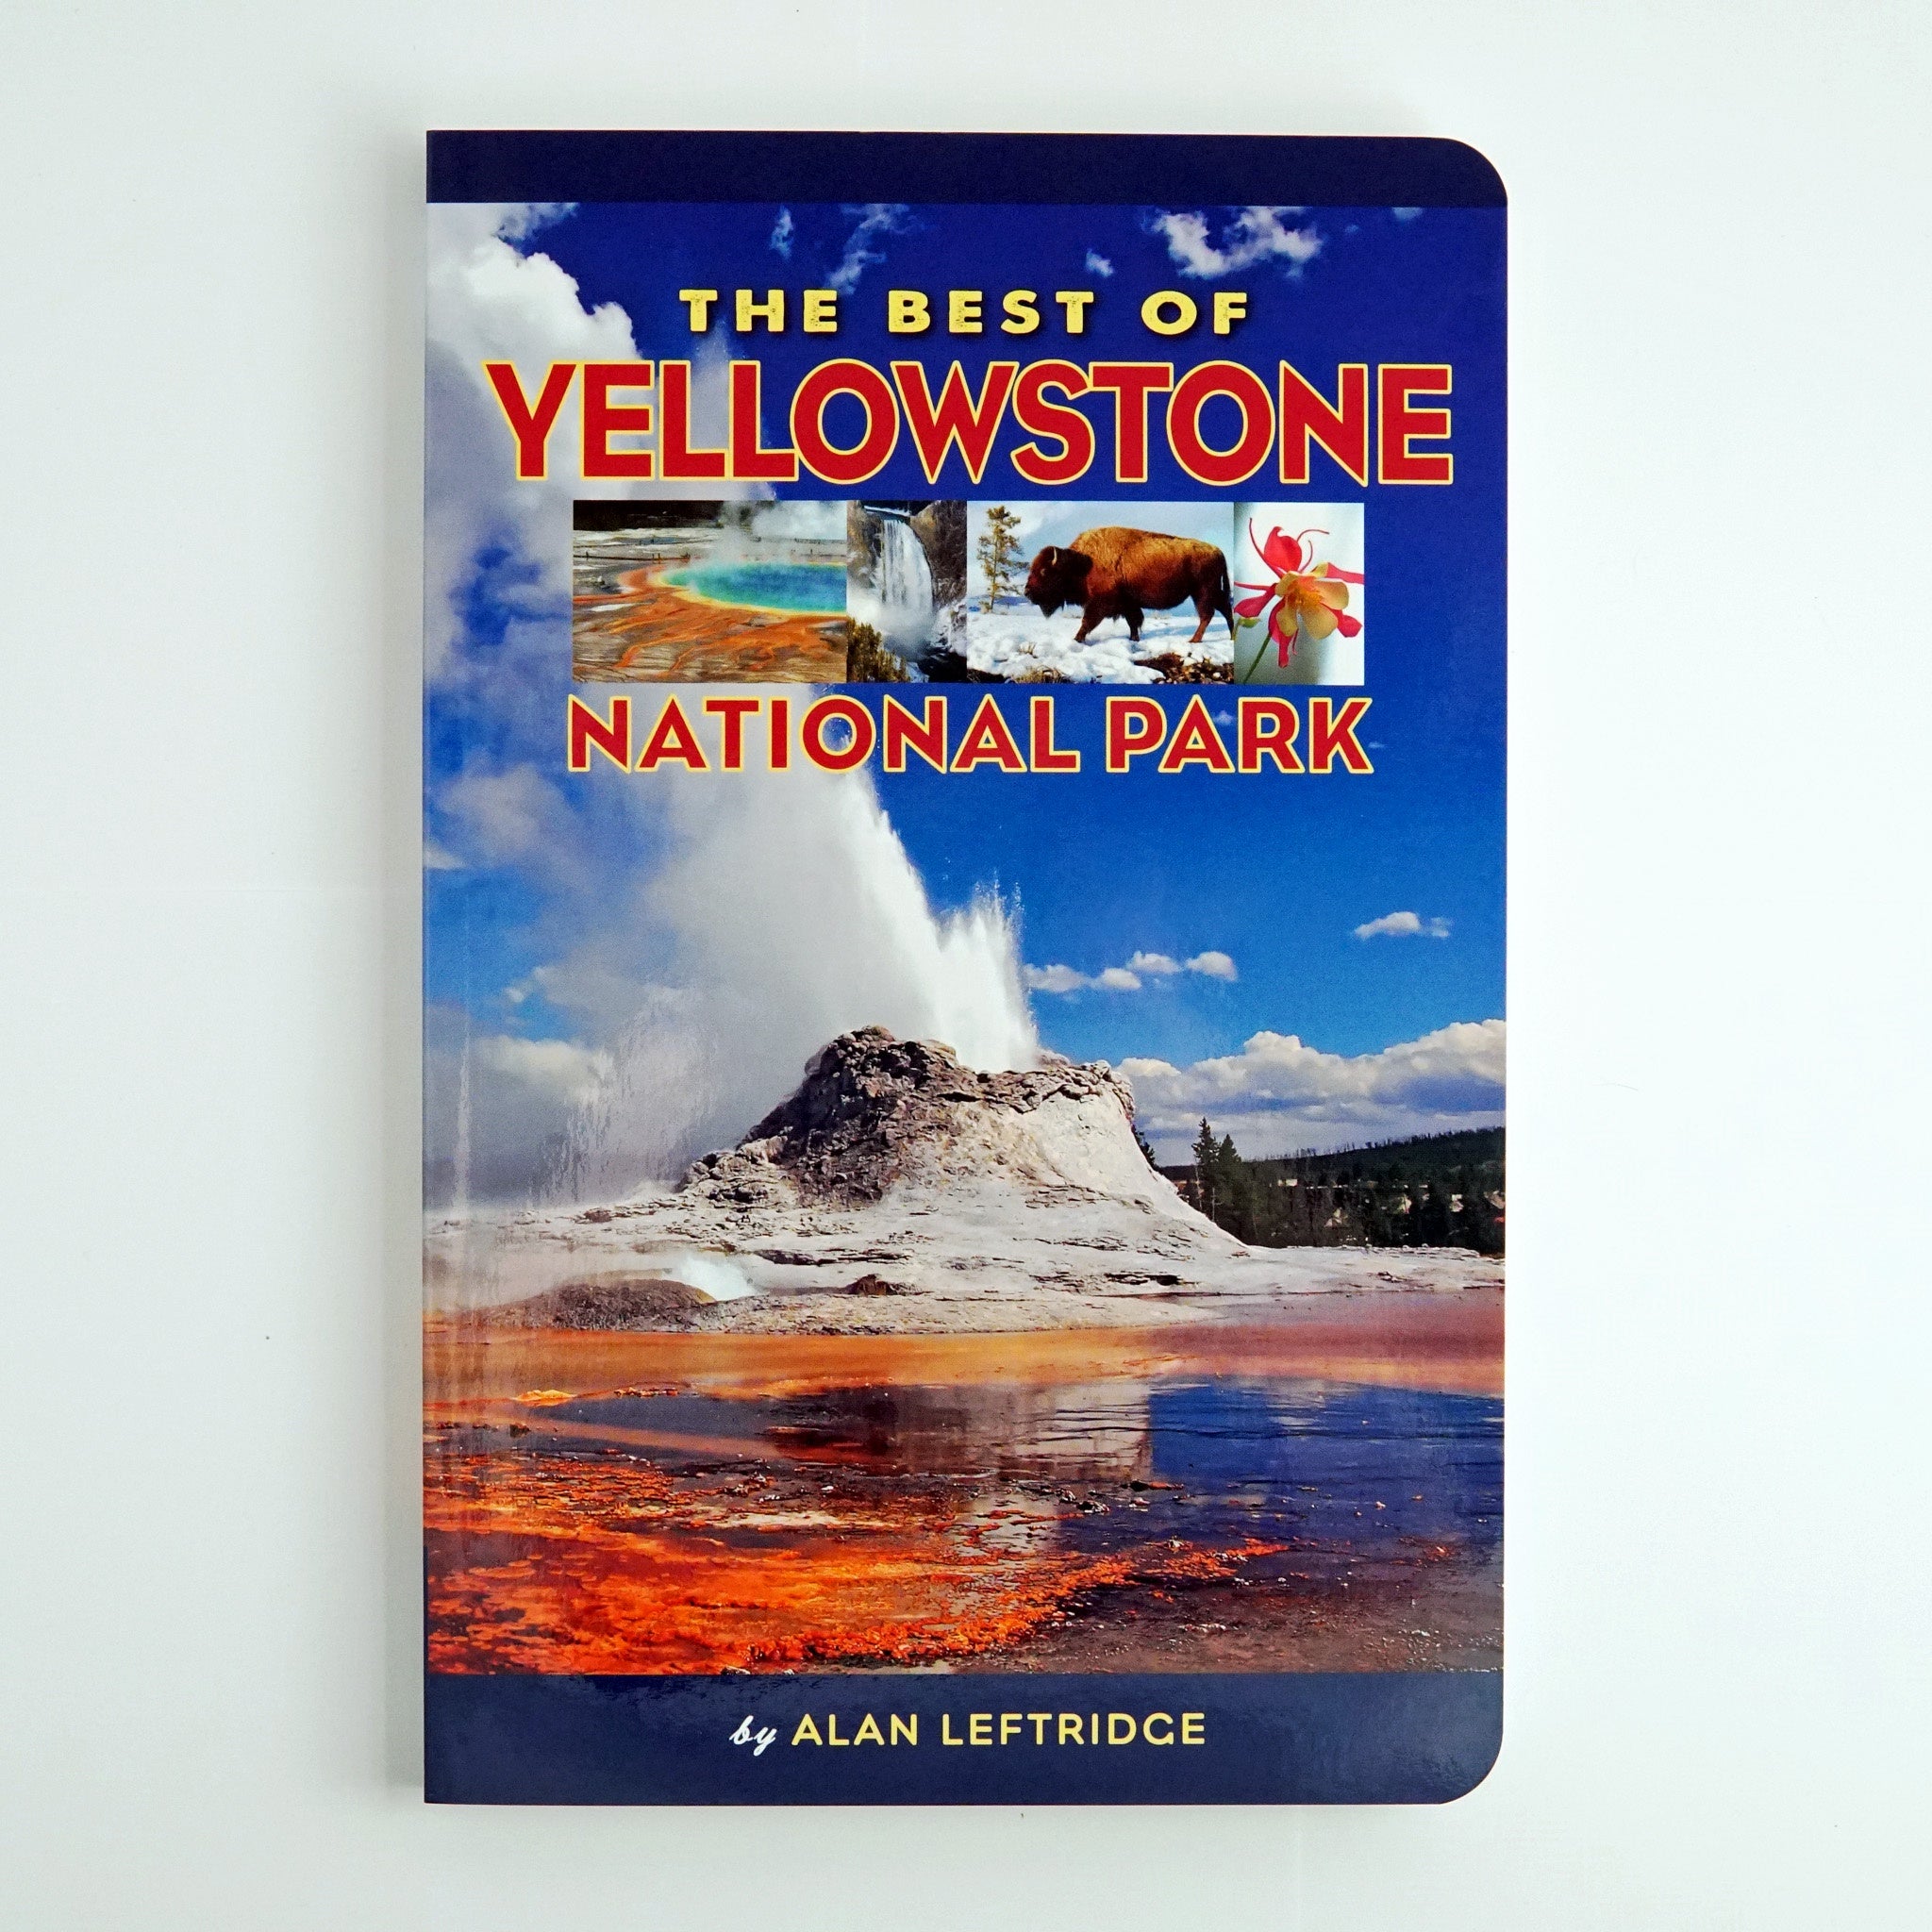 BK 10 THE BEST OF YELLOWSTONE NATIONAL PARK BY ALAN LEFTRIDGE #21038230 D2 MAR24